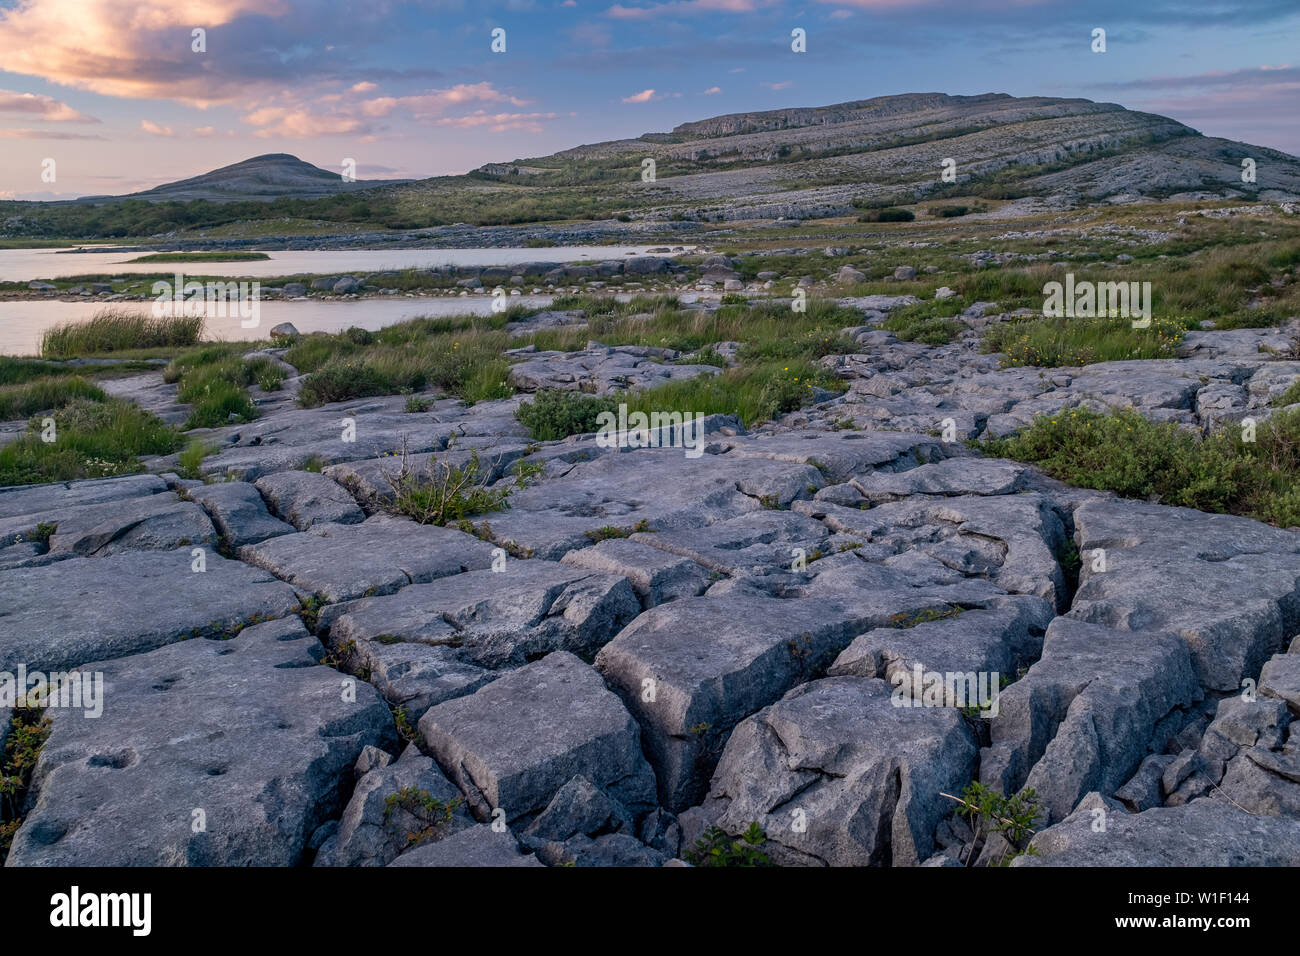 A sunset shot of the stunning and mars like landscape that is The Burren National Park, County Clare, Ireland with small lake in the foreground, nobod Stock Photo